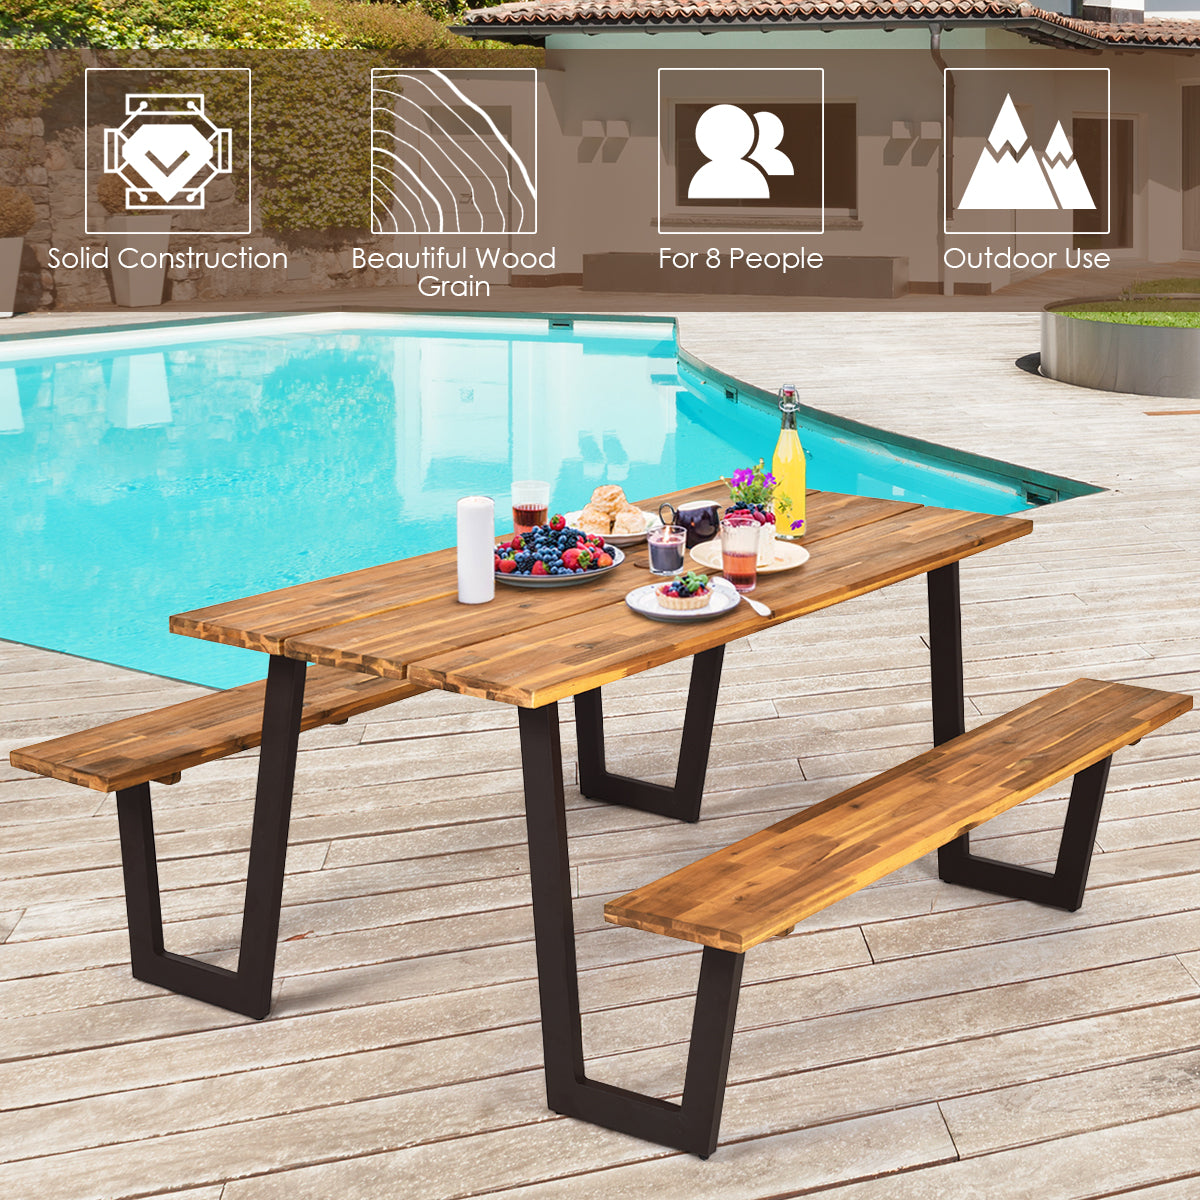 Picnic Table Bench Set with Umbrella Hole